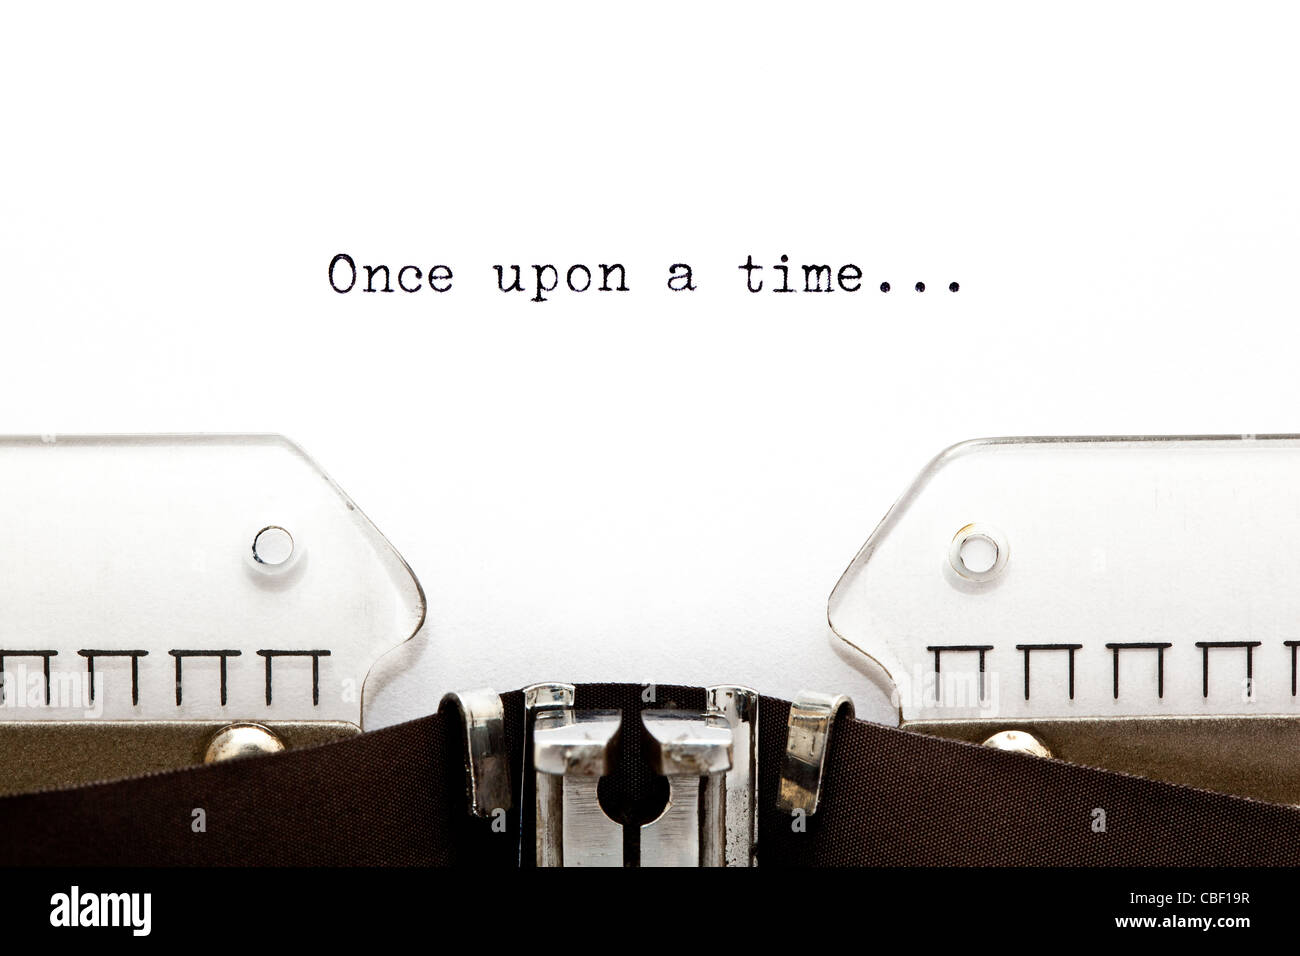 Once upon a time... written on an old typewriter Stock Photo